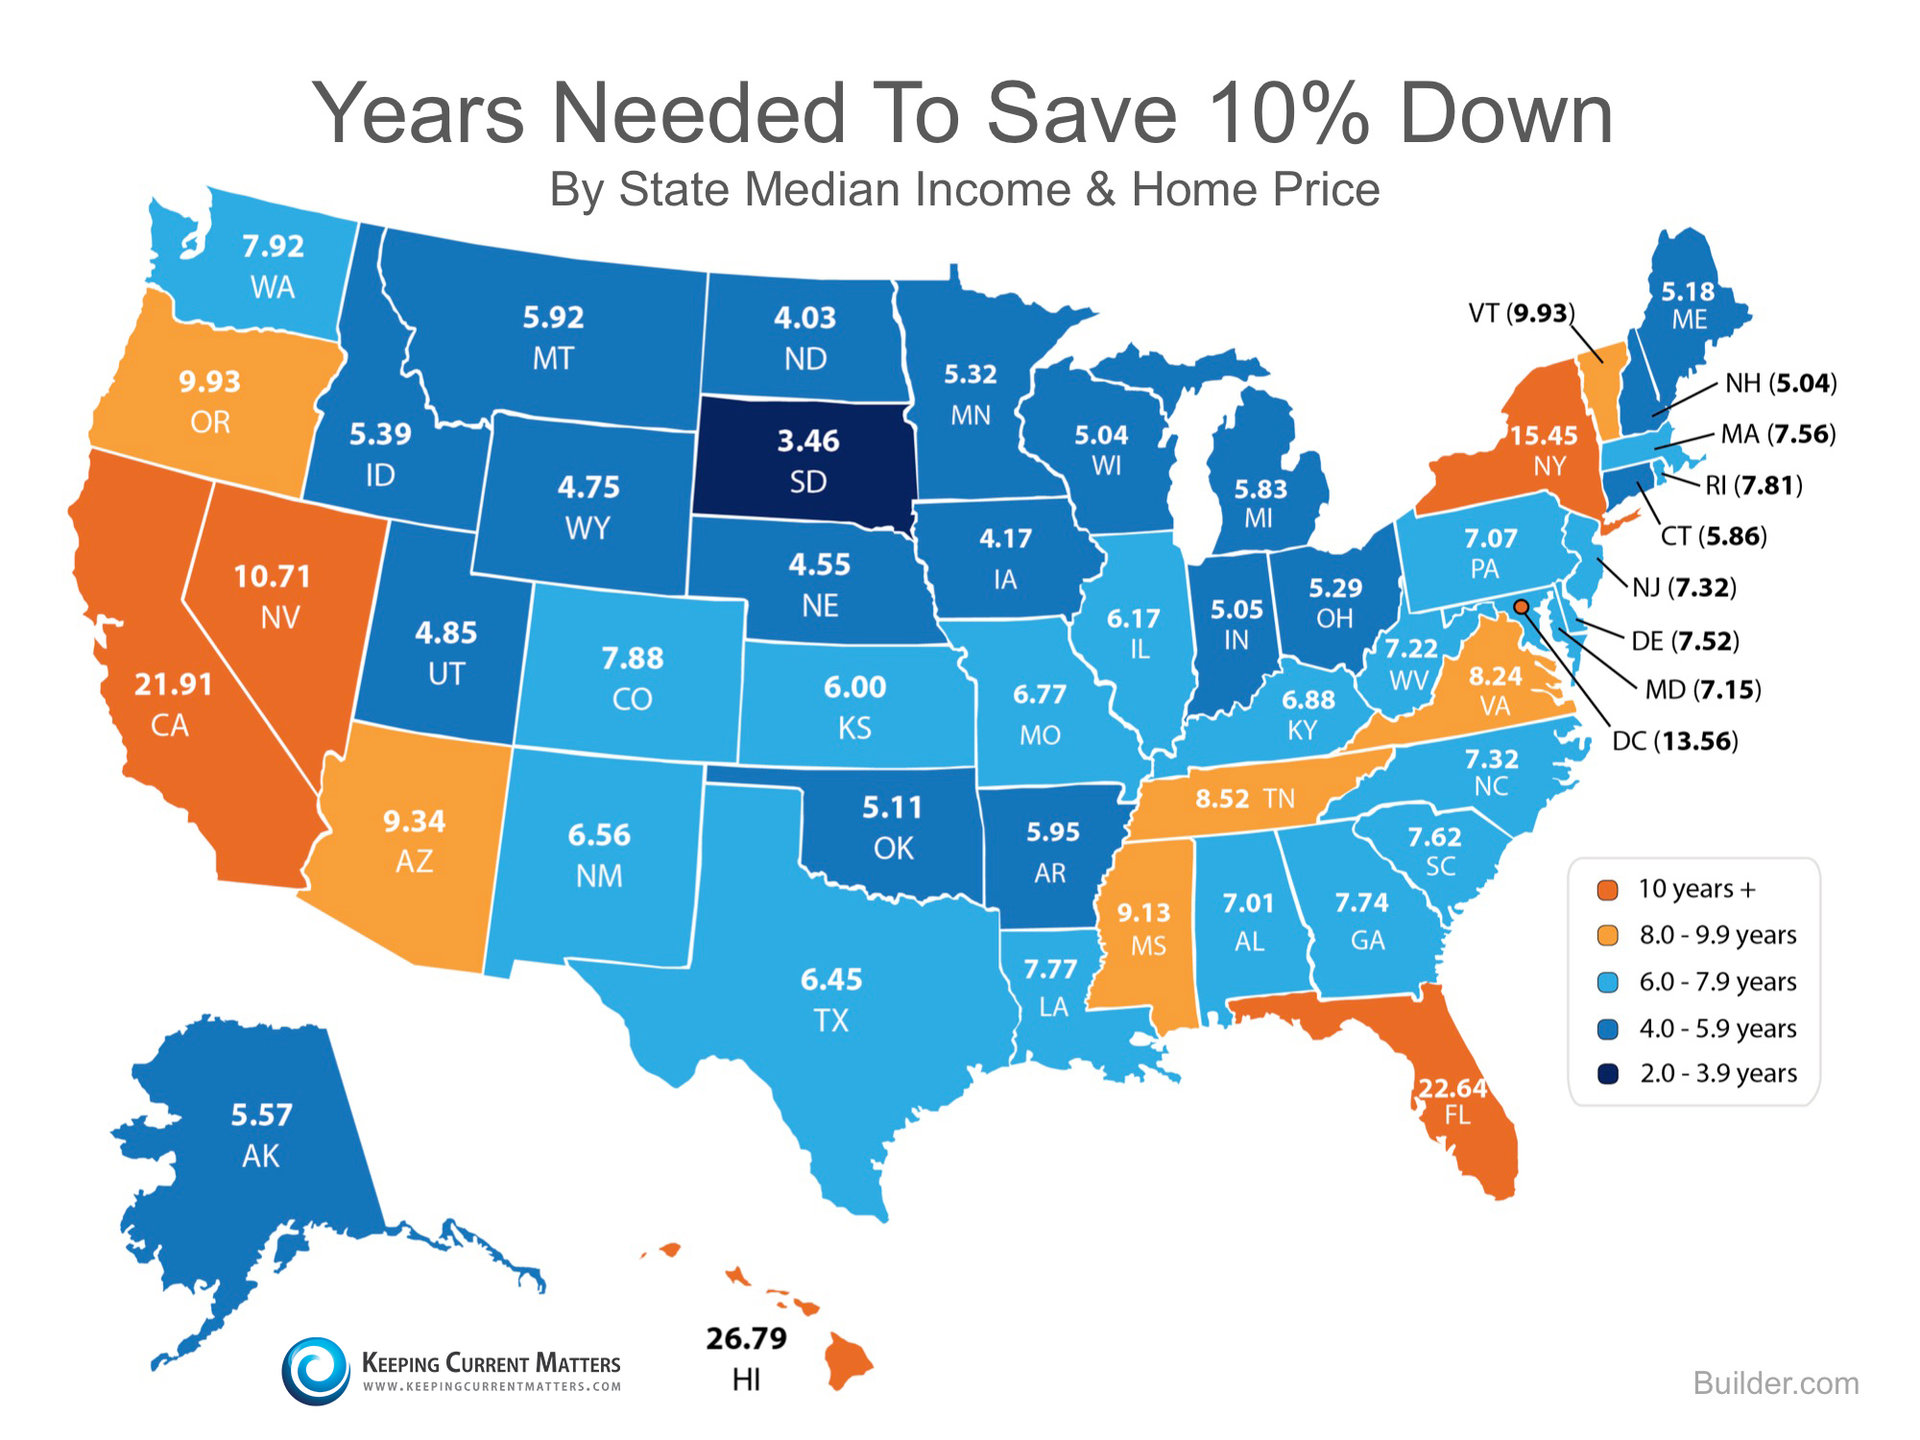 Years Needed to Save 10% Down | Keeping Current Matters